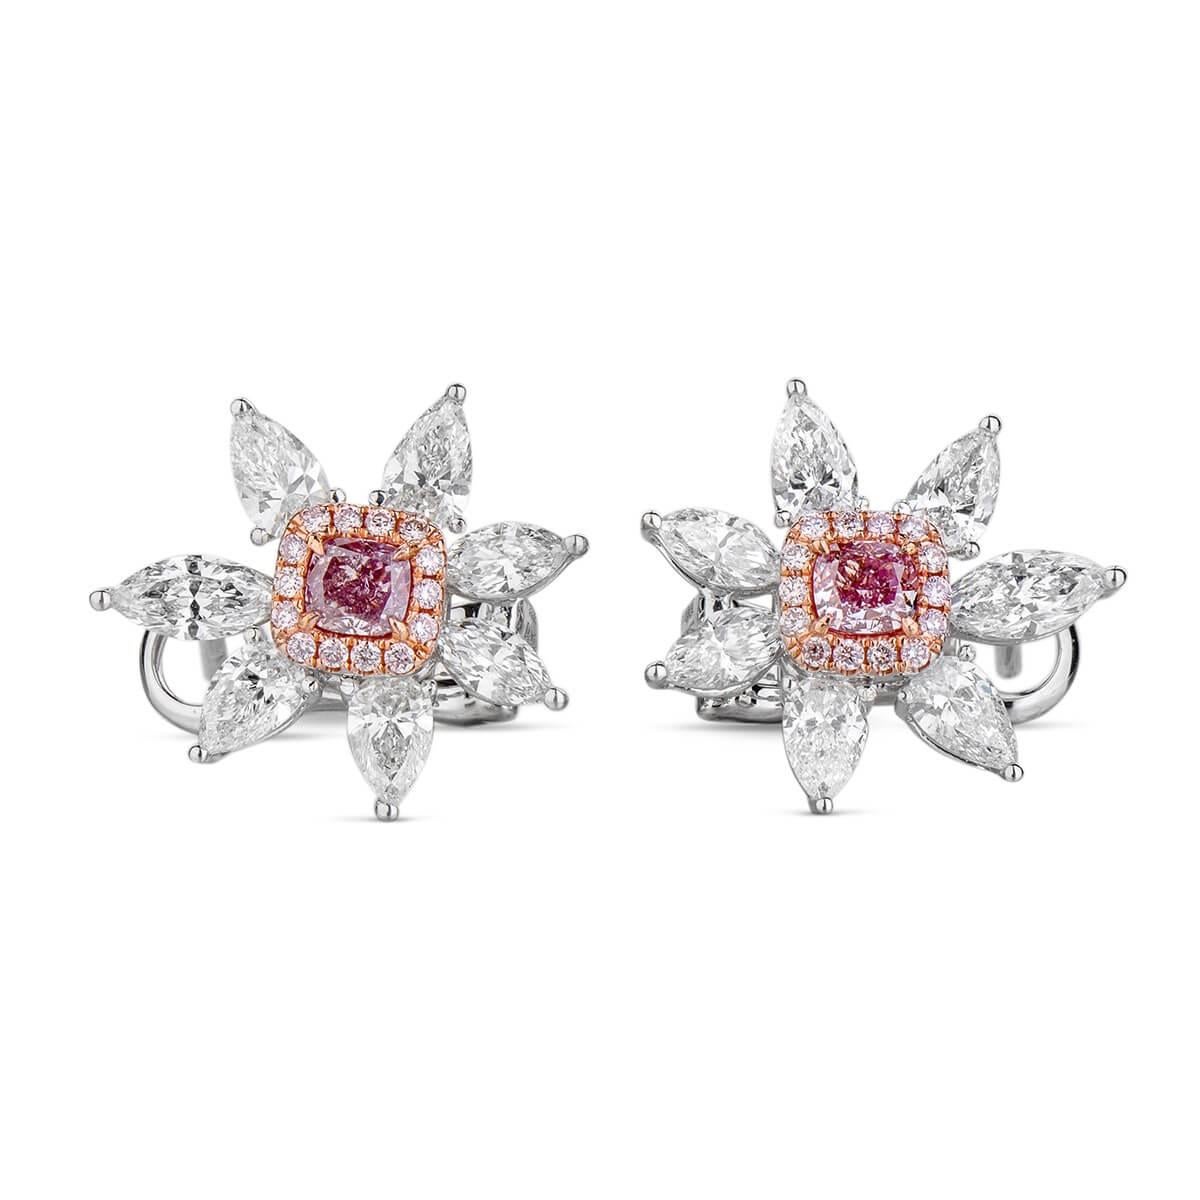 Modern GIA Certified White Gold Flower Fancy Pink and White Diamond Earrings - 2.19 ct For Sale